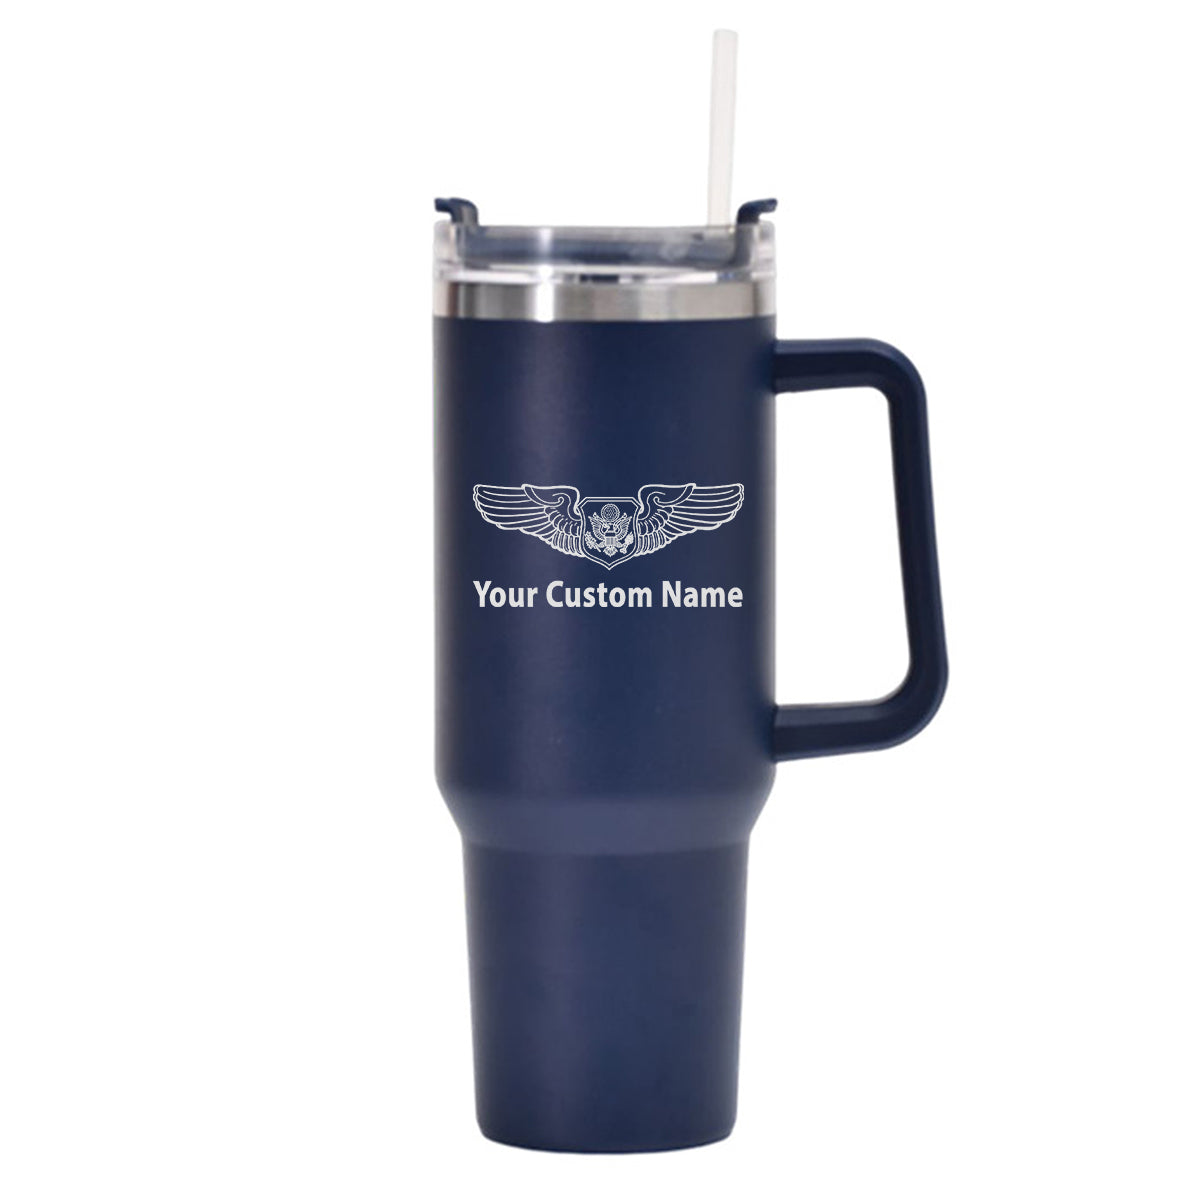 Custom Name (Special US Air Force) Designed 40oz Stainless Steel Car Mug With Holder